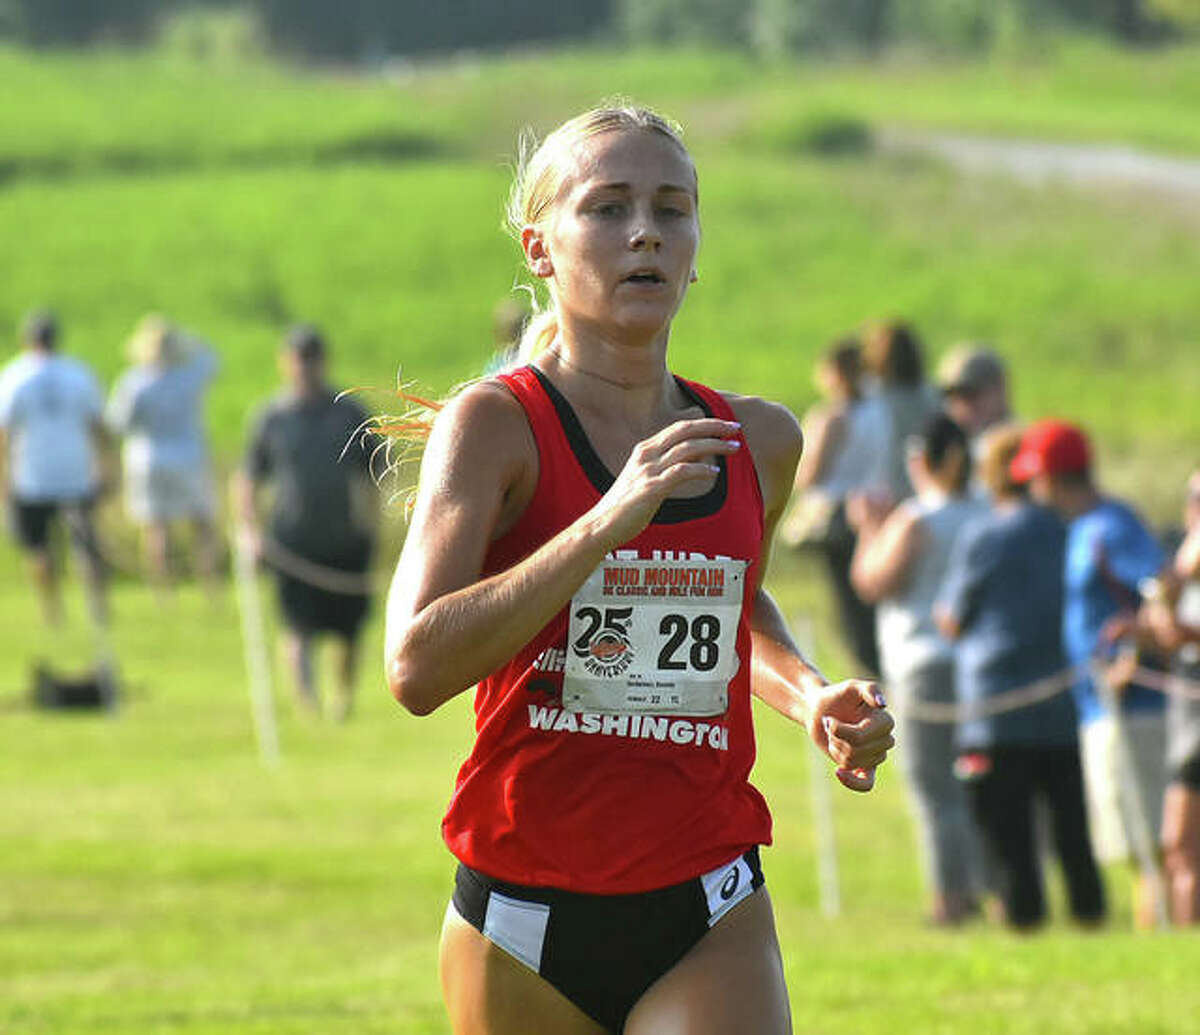 SIUE rising senior Kassidy Dexheimer was the top female finisher at Mud Mountain on Saturday at SIUE.